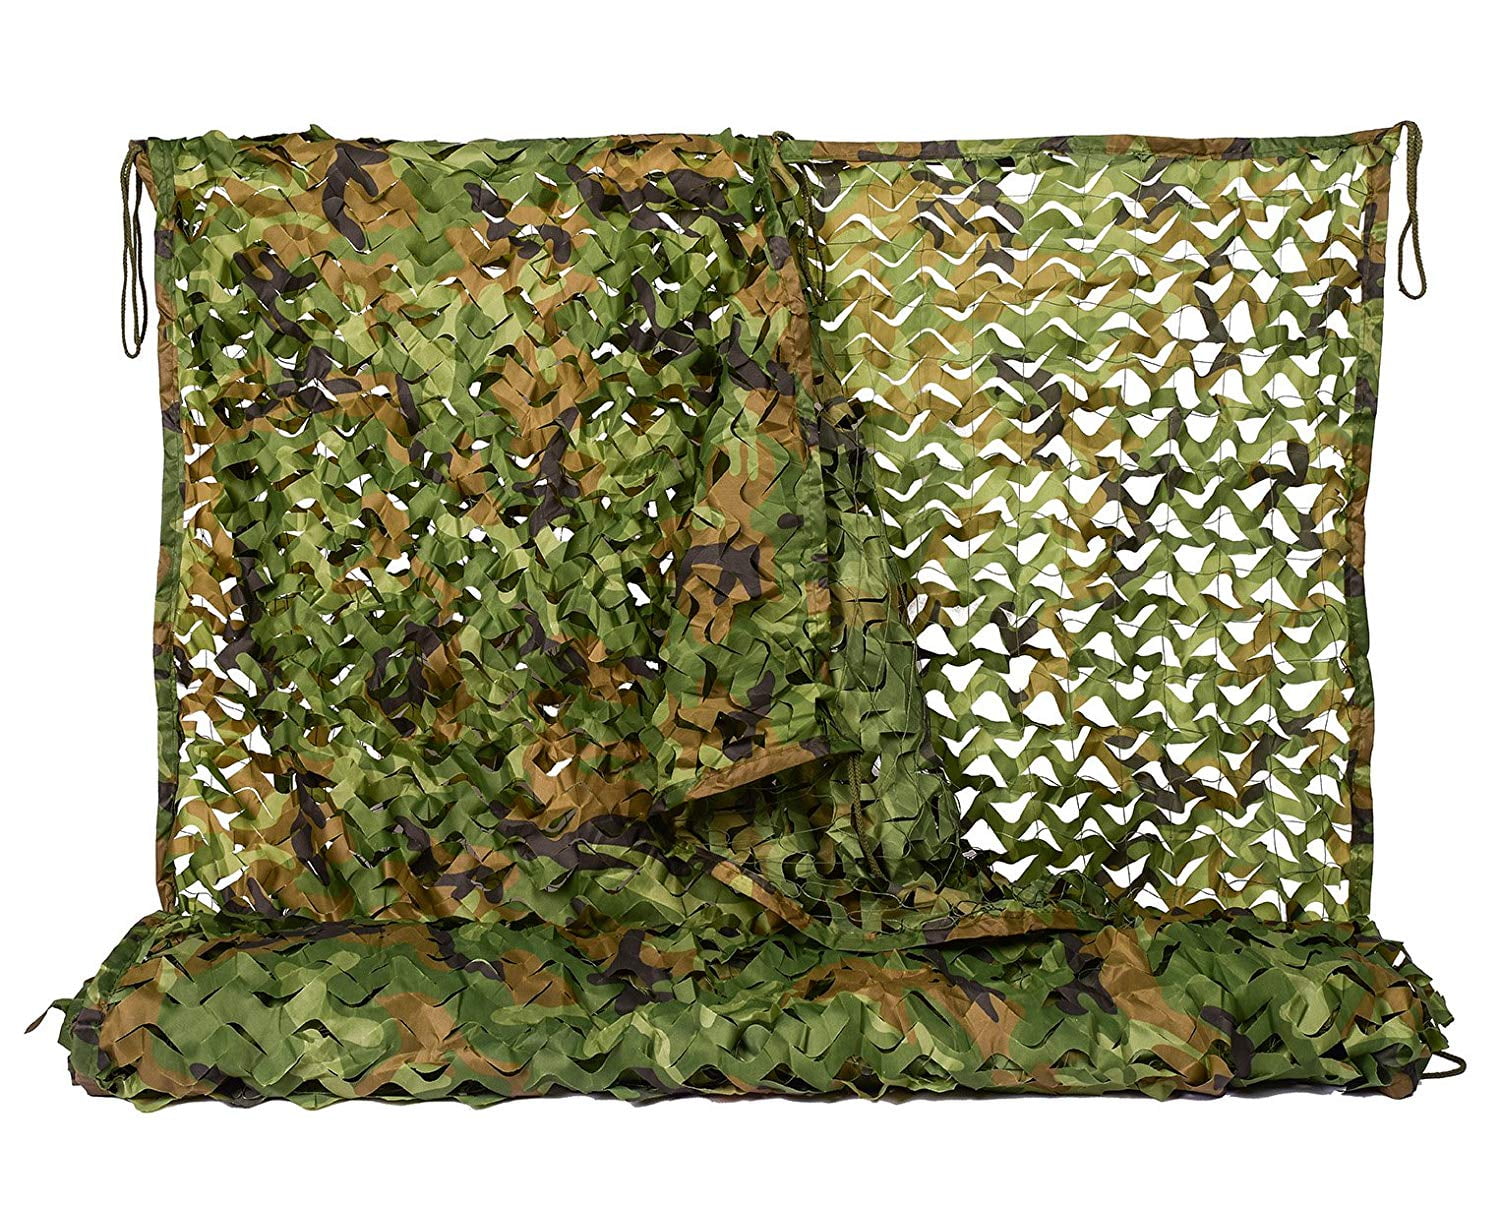 Camo Netting Cam Net Blinds for Decoration Sunshade Shooting Hunting Military 